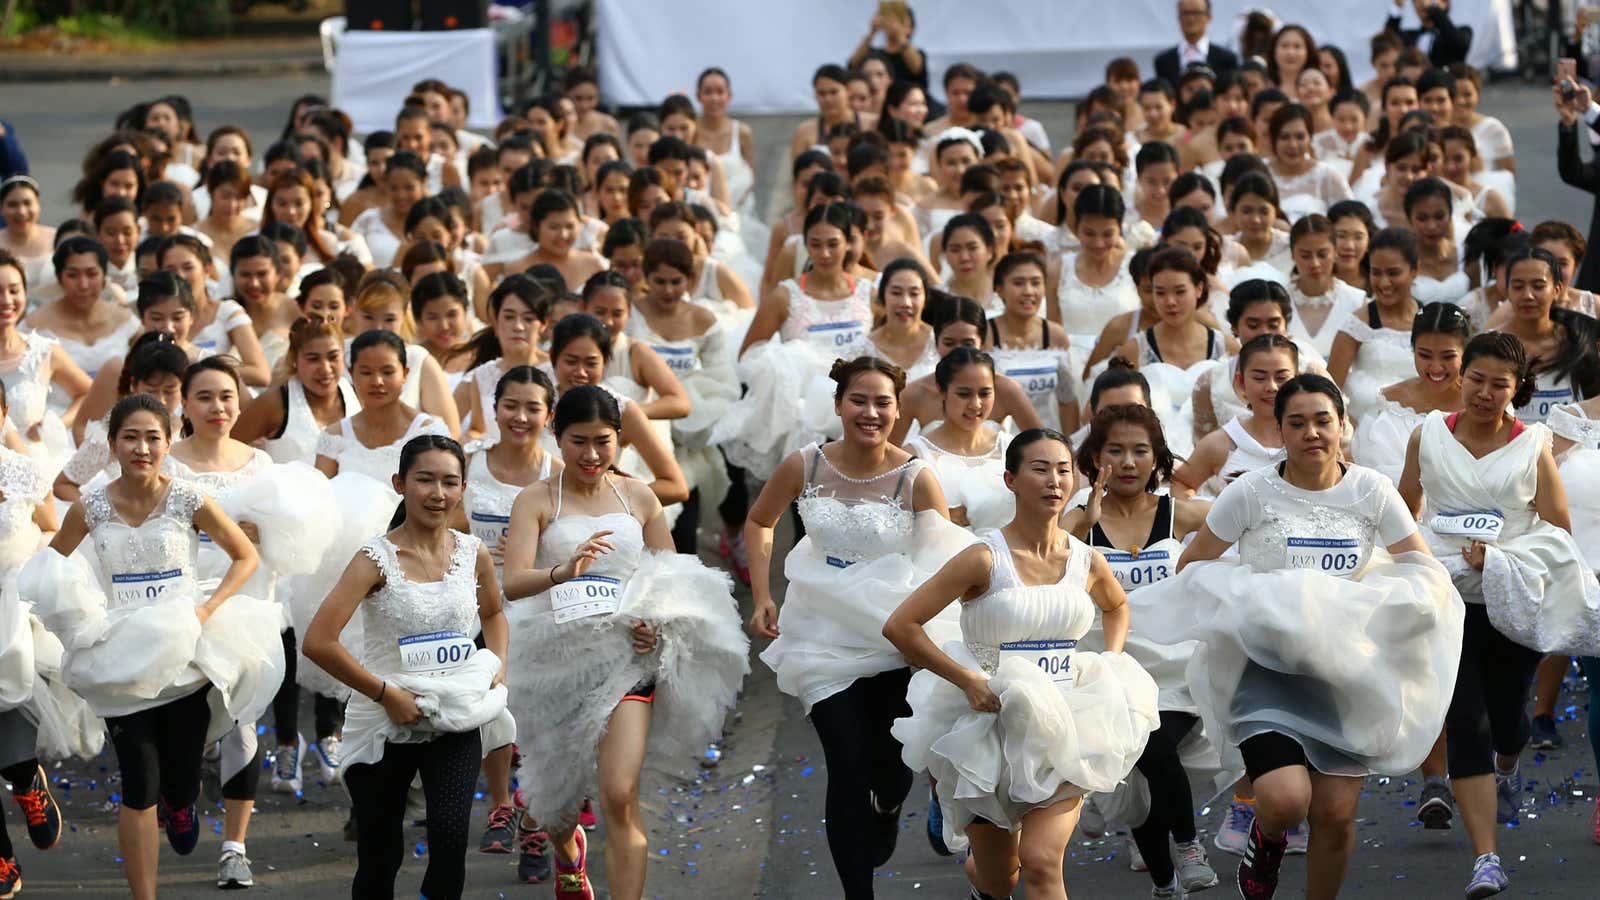 Brides-to-be participate in the “Running of the Brides” race in a park in Bangkok, Thailand March 25, 2017.